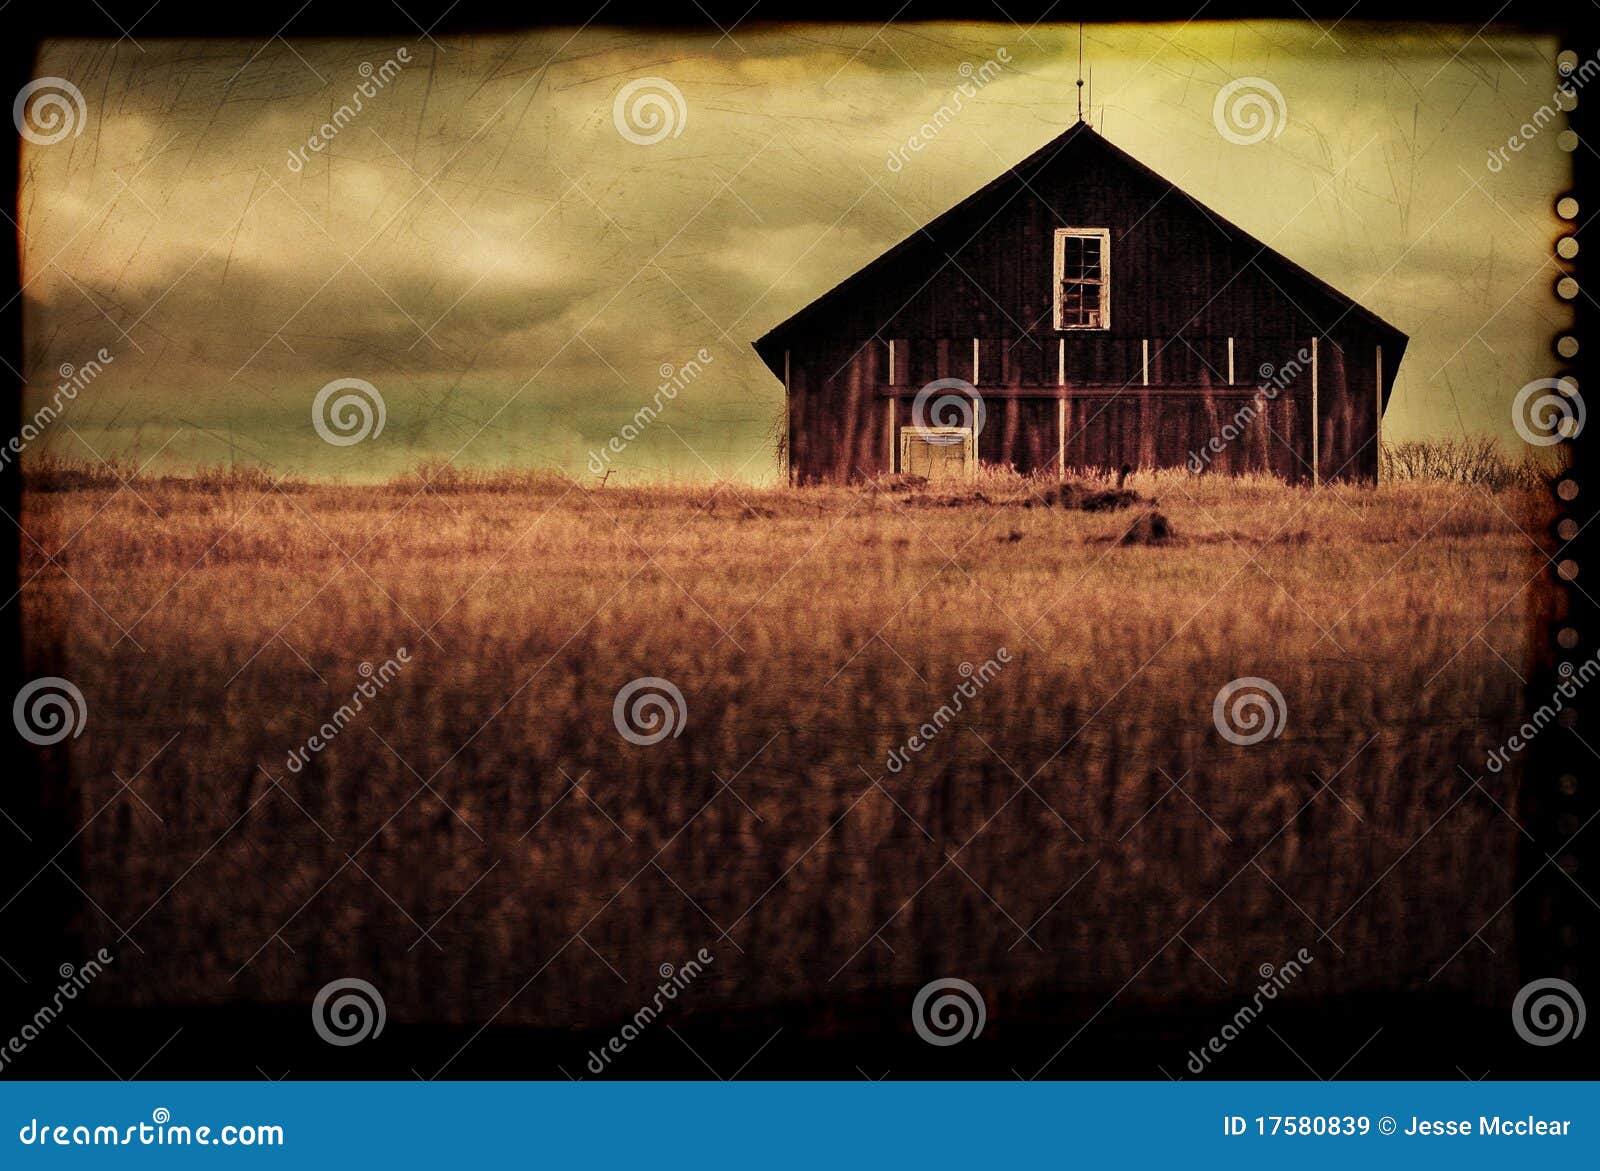 Old antique barn in field stock image. Image of antiqued - 17580839